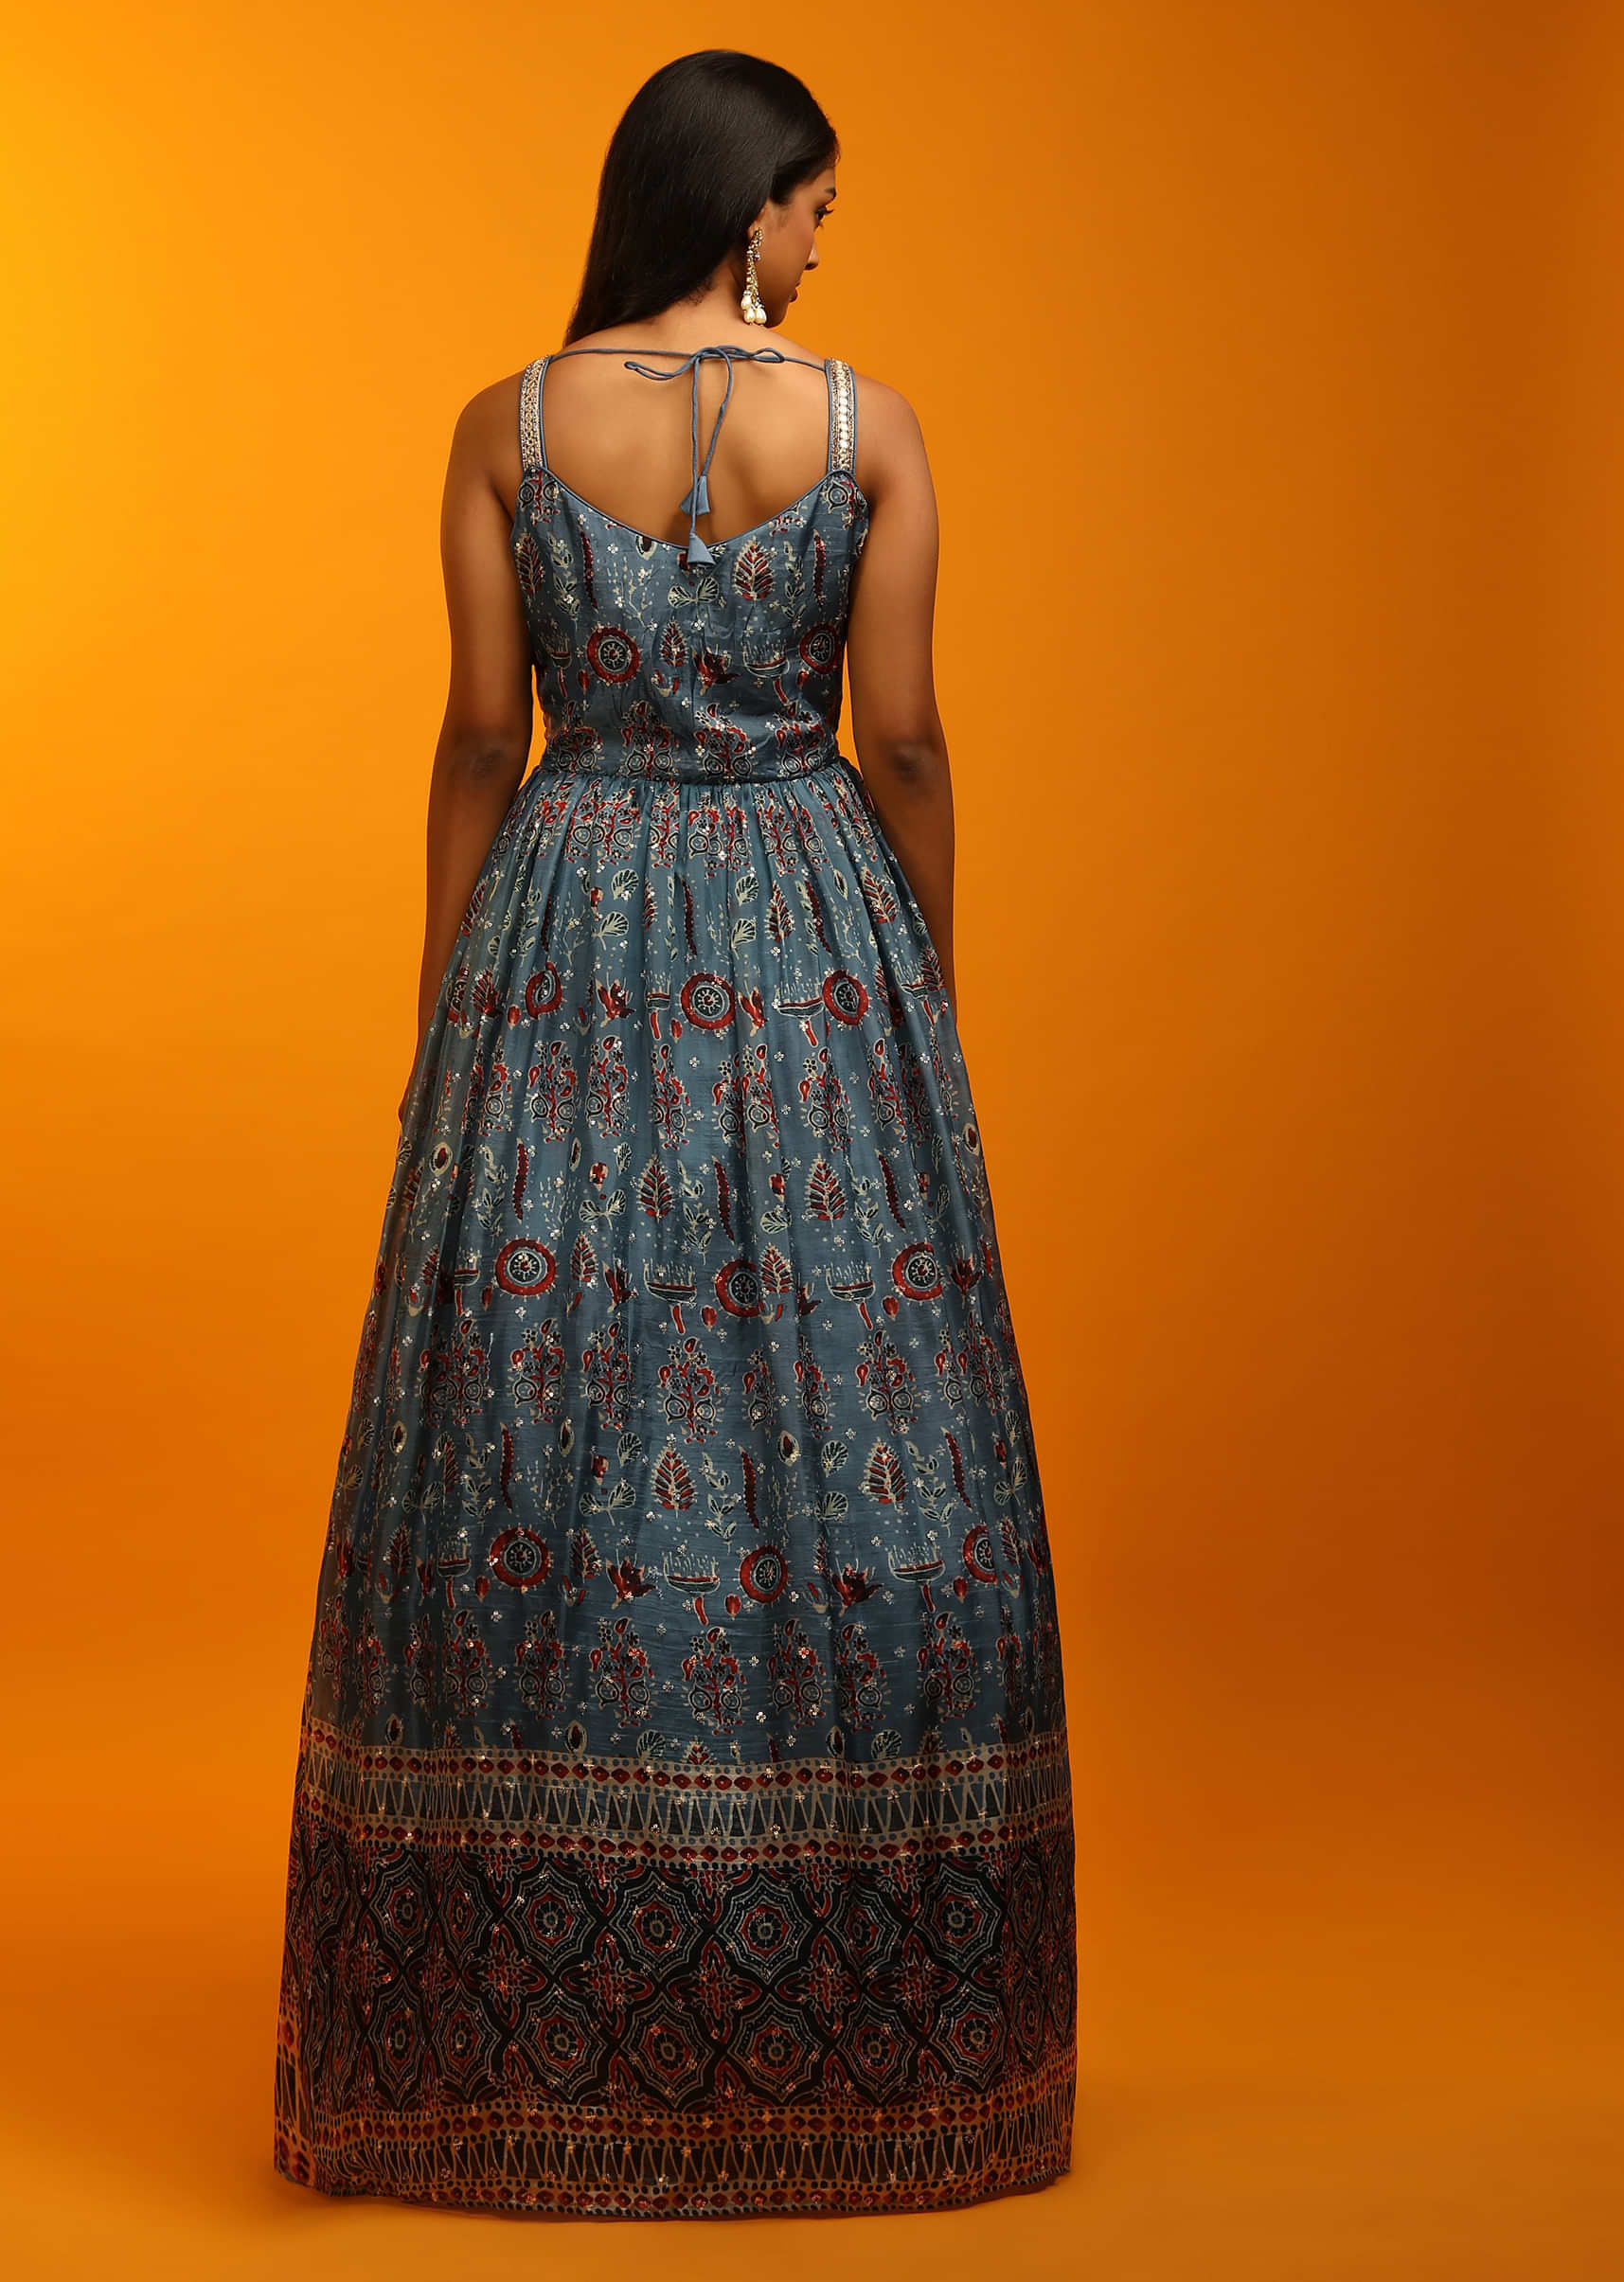 Stone Blue Anarkali Dress In Satin Crepe With Ethnic Batik Print And Mirror Embroidery  